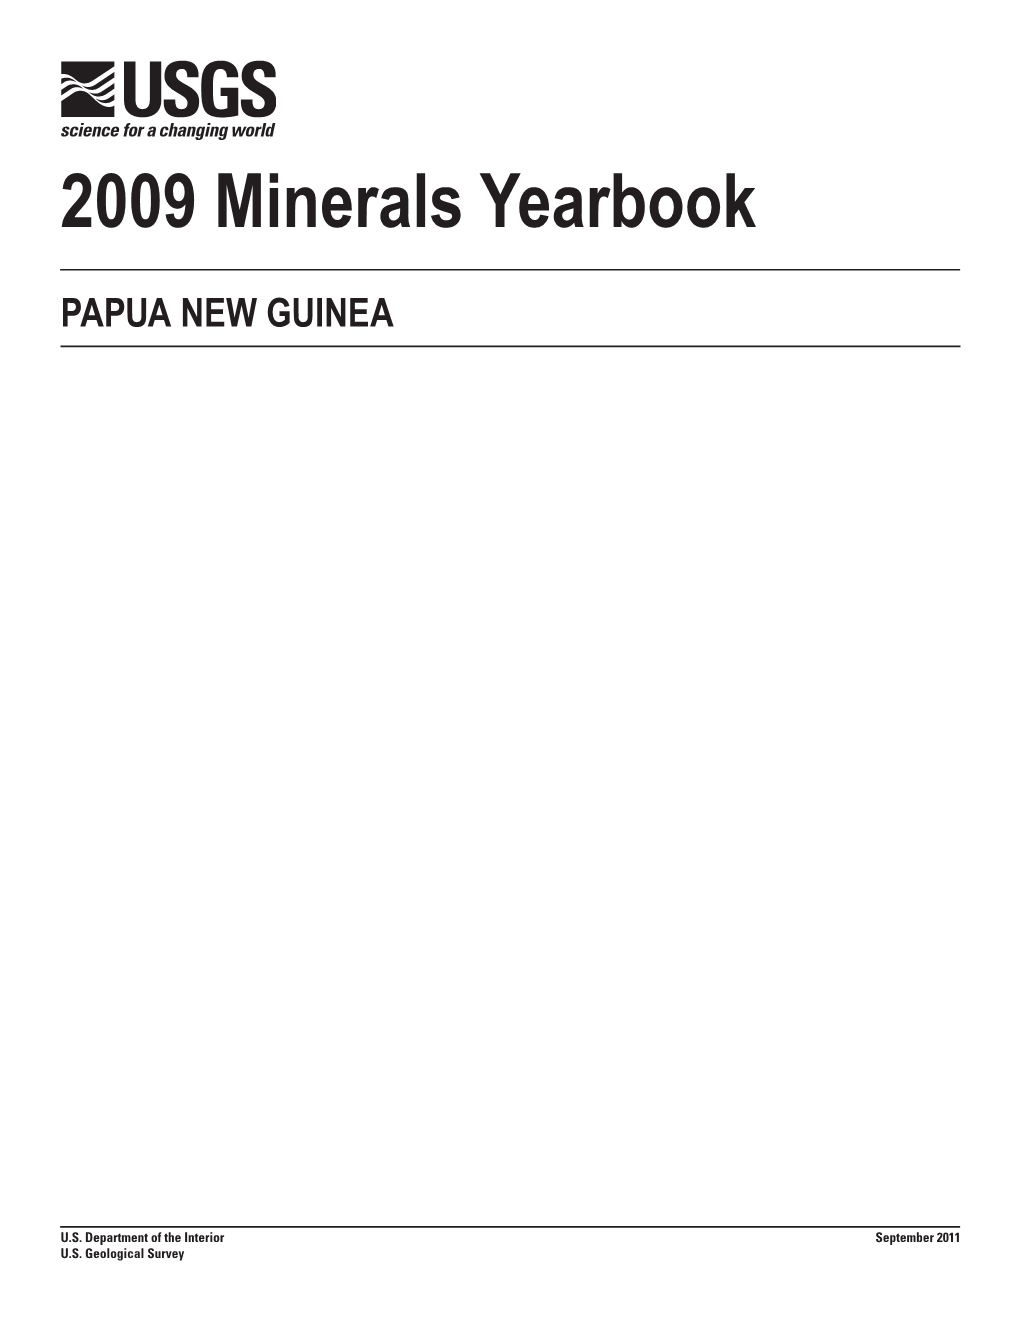 The Mineral Industry of Papua New Guinea in 2009